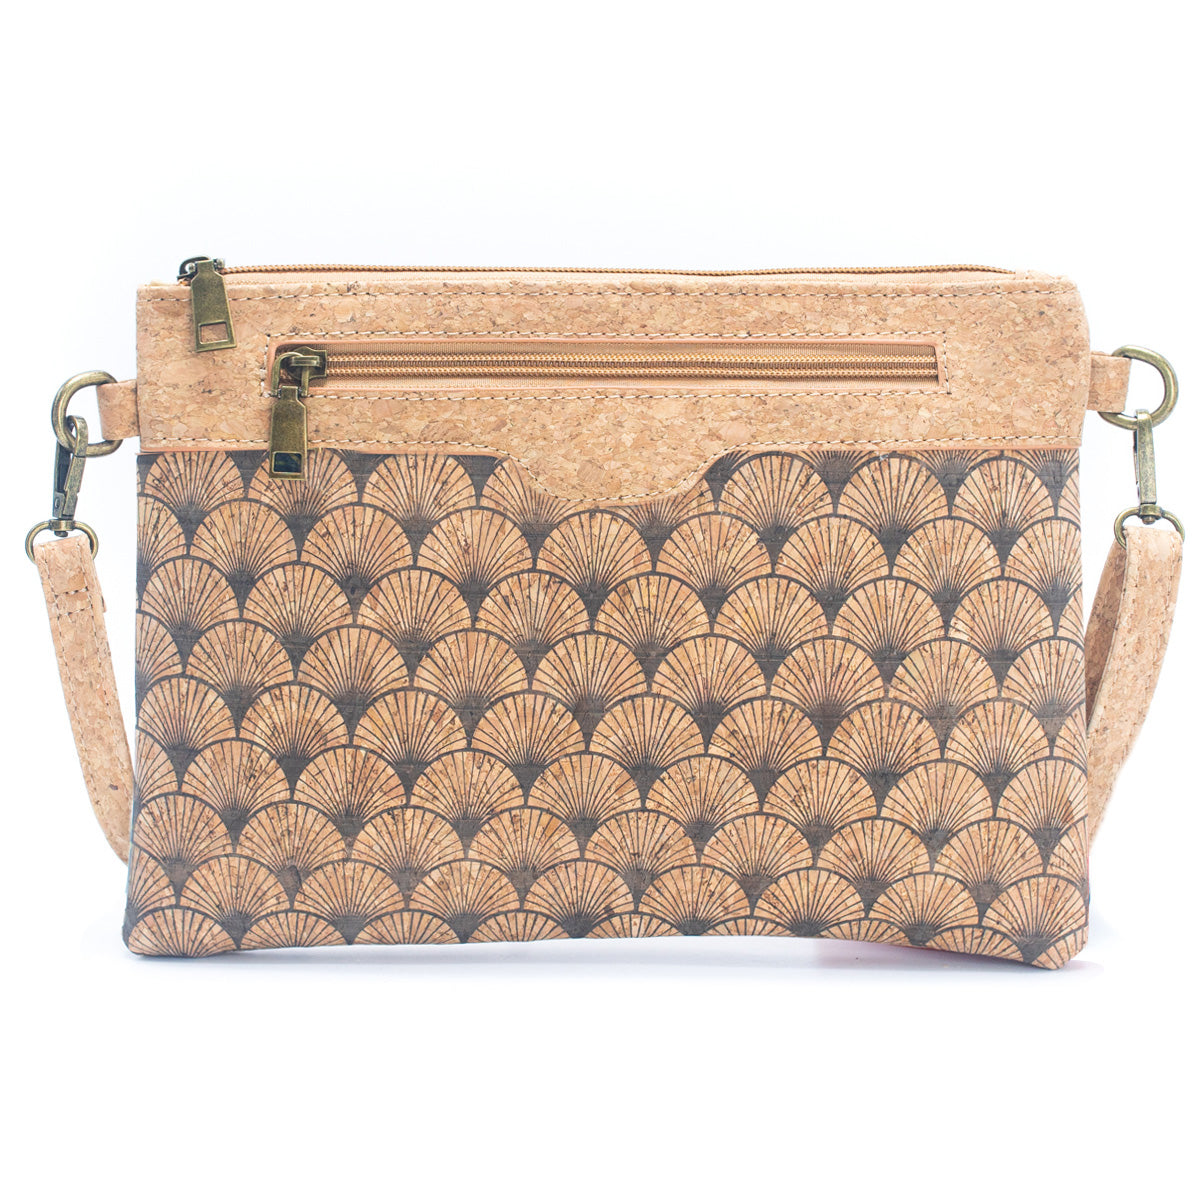 Natural Cork w/ Printed Design Women's Crossbody & Clutch Bag  | THE CORK COLLECTION